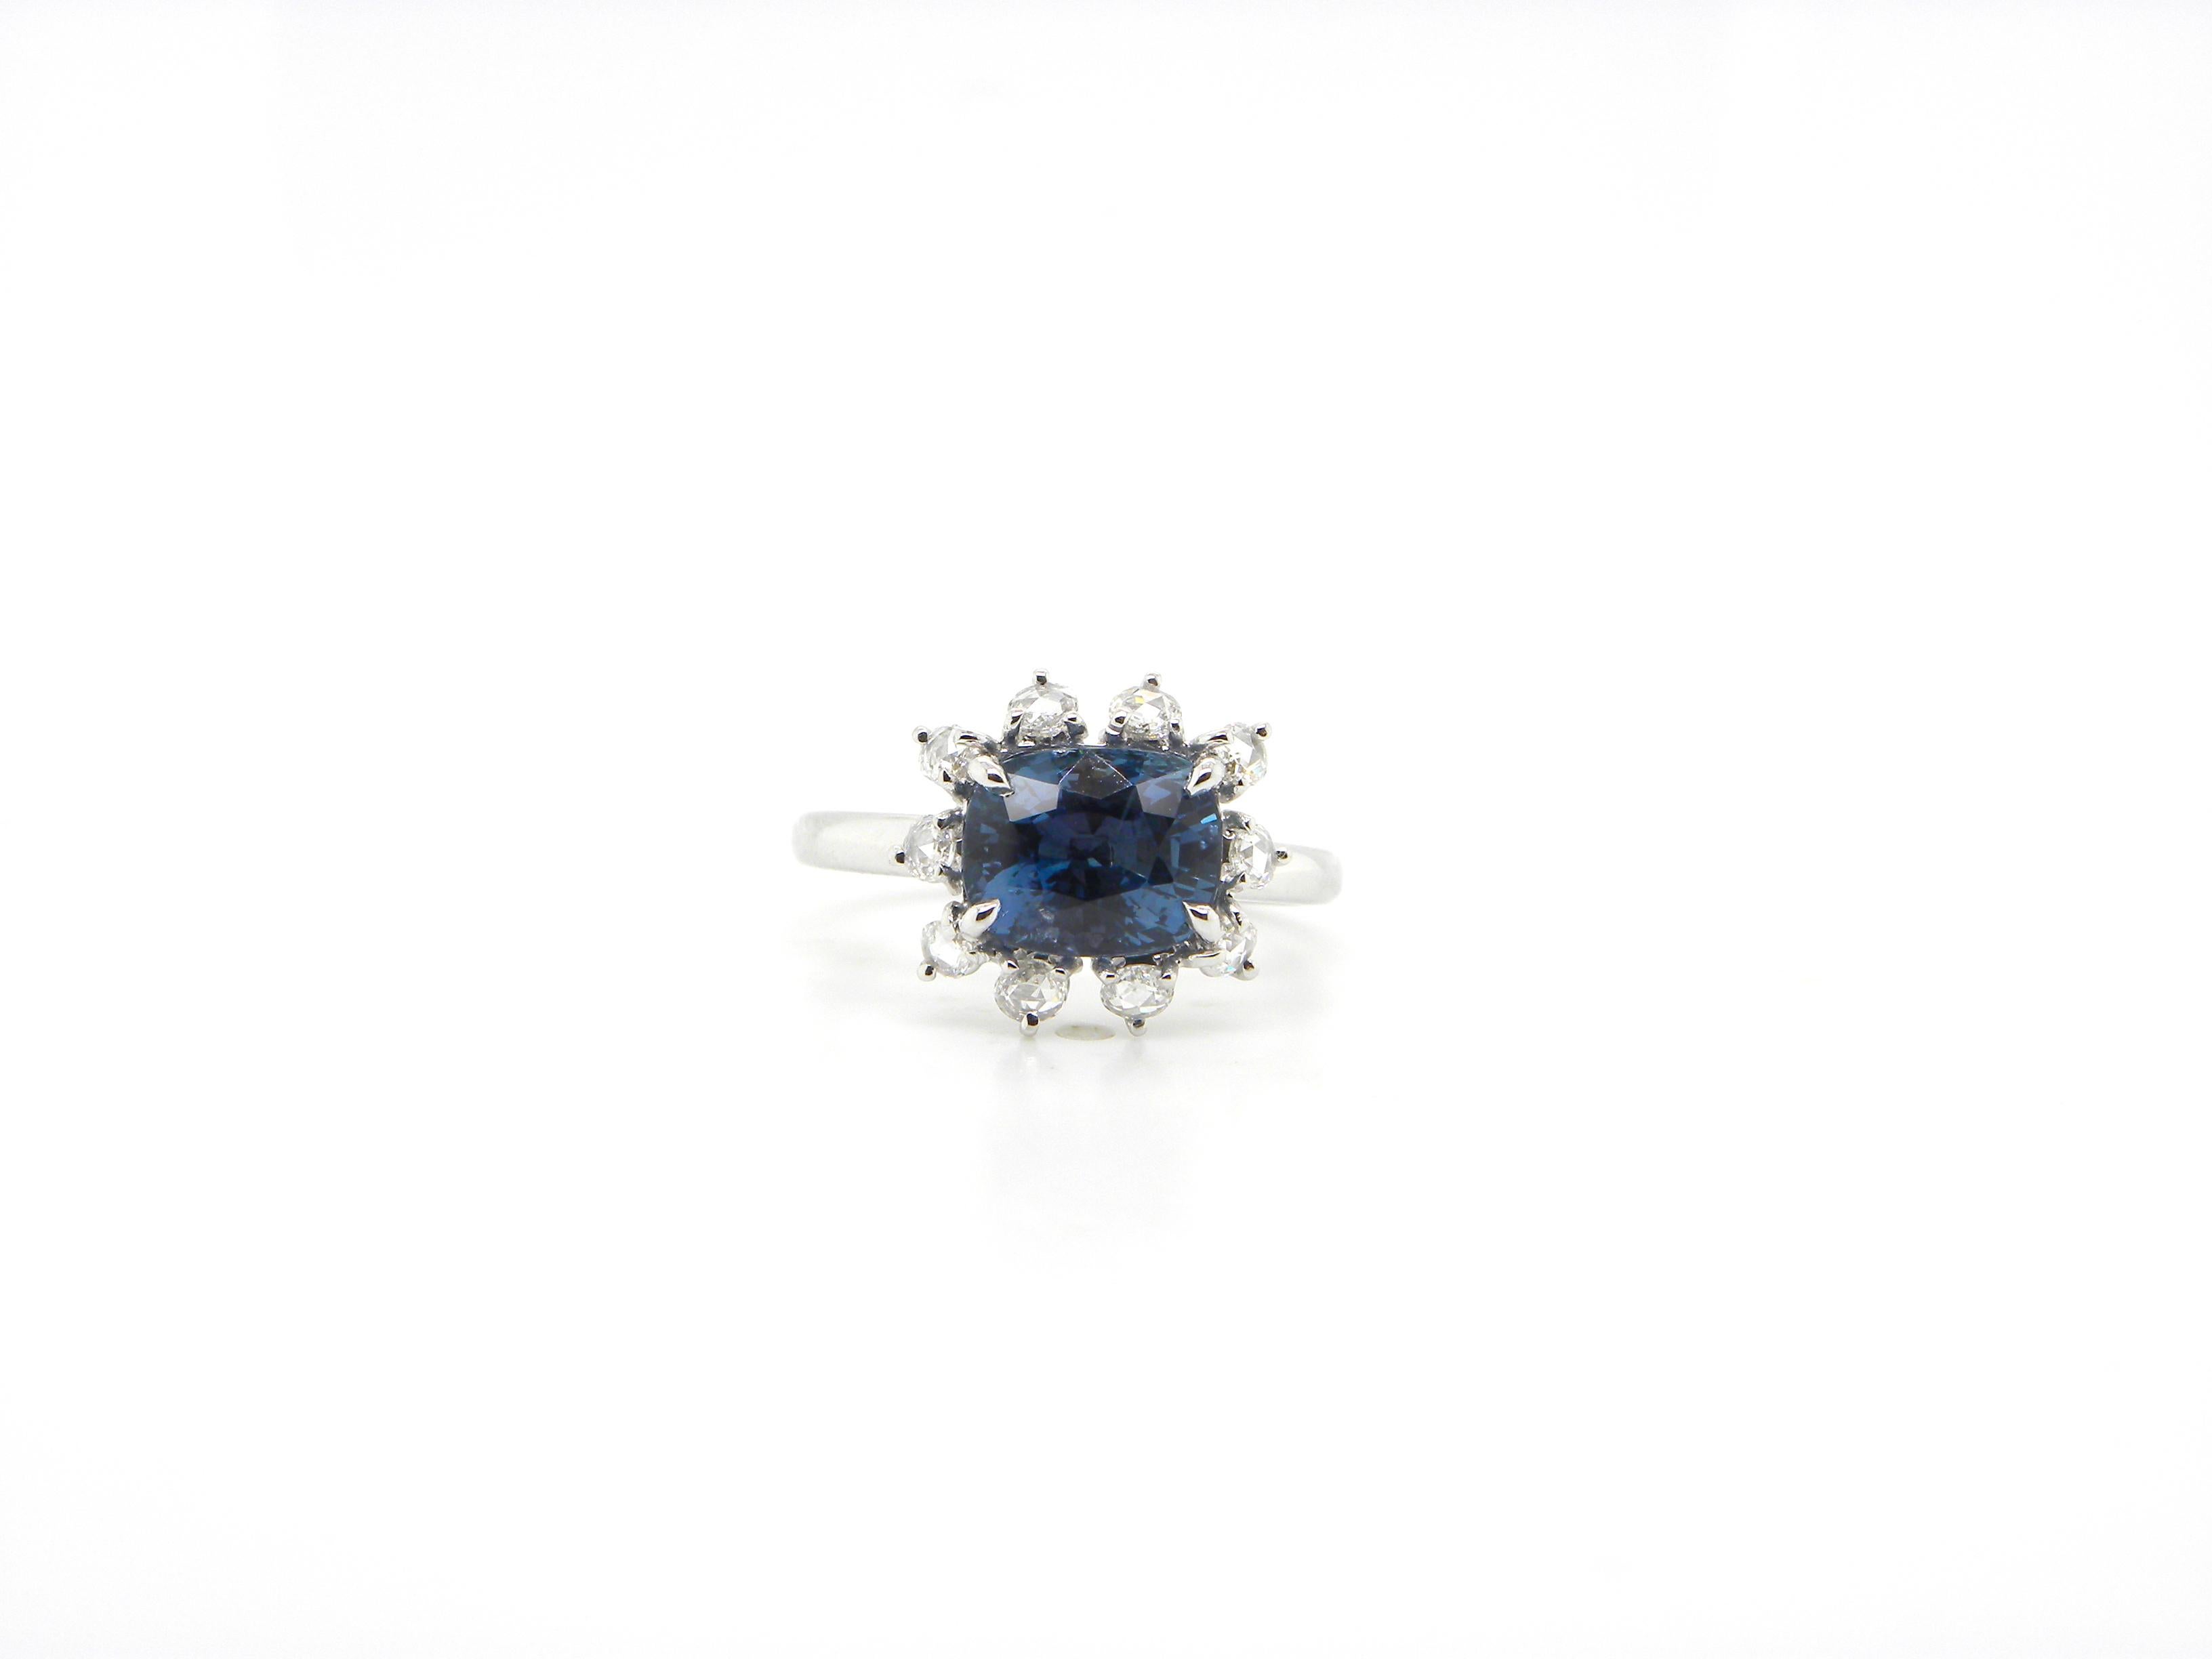 2.77 Carat GRS Certified Unheated Burmese Sapphire and Diamond Engagement Ring:

An elegant ring, it features a gorgeous GRS certified cushion-cut unheated Burmese blue sapphire weighing 2.77 carat, surrounded by a halo of super-white rose cut